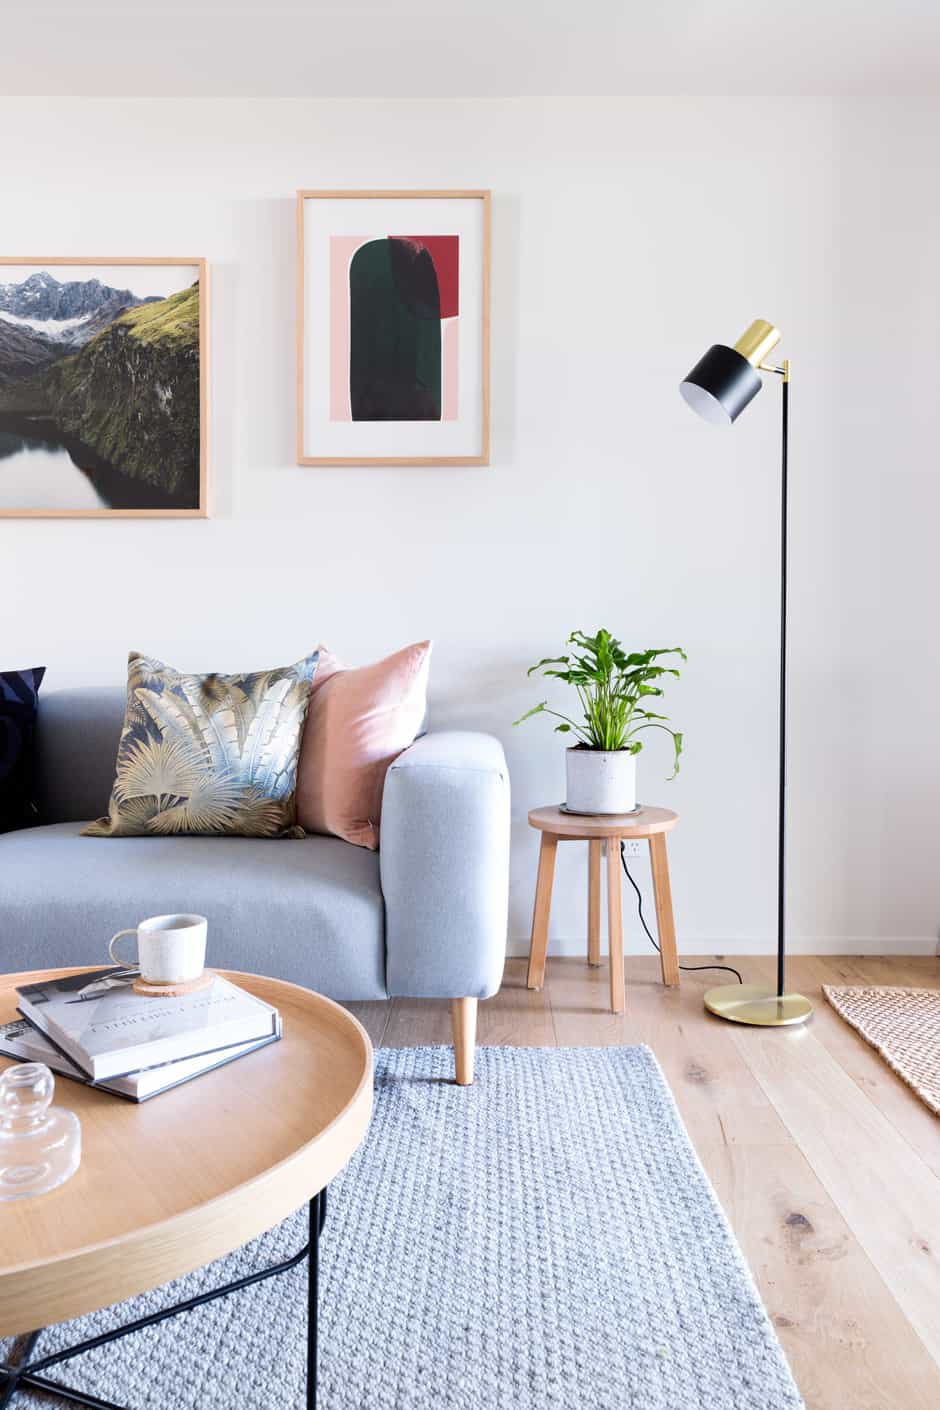 LIVING Photographic artwork South (left) by Brooke Holm and No 14 by Berit Mogensen Lopez hang above a sofa and coffee table from Città. The floor lamp is from Lighting Direct, and the Sherpa Weave rug by Armadillo & Co is from The Ivy House.